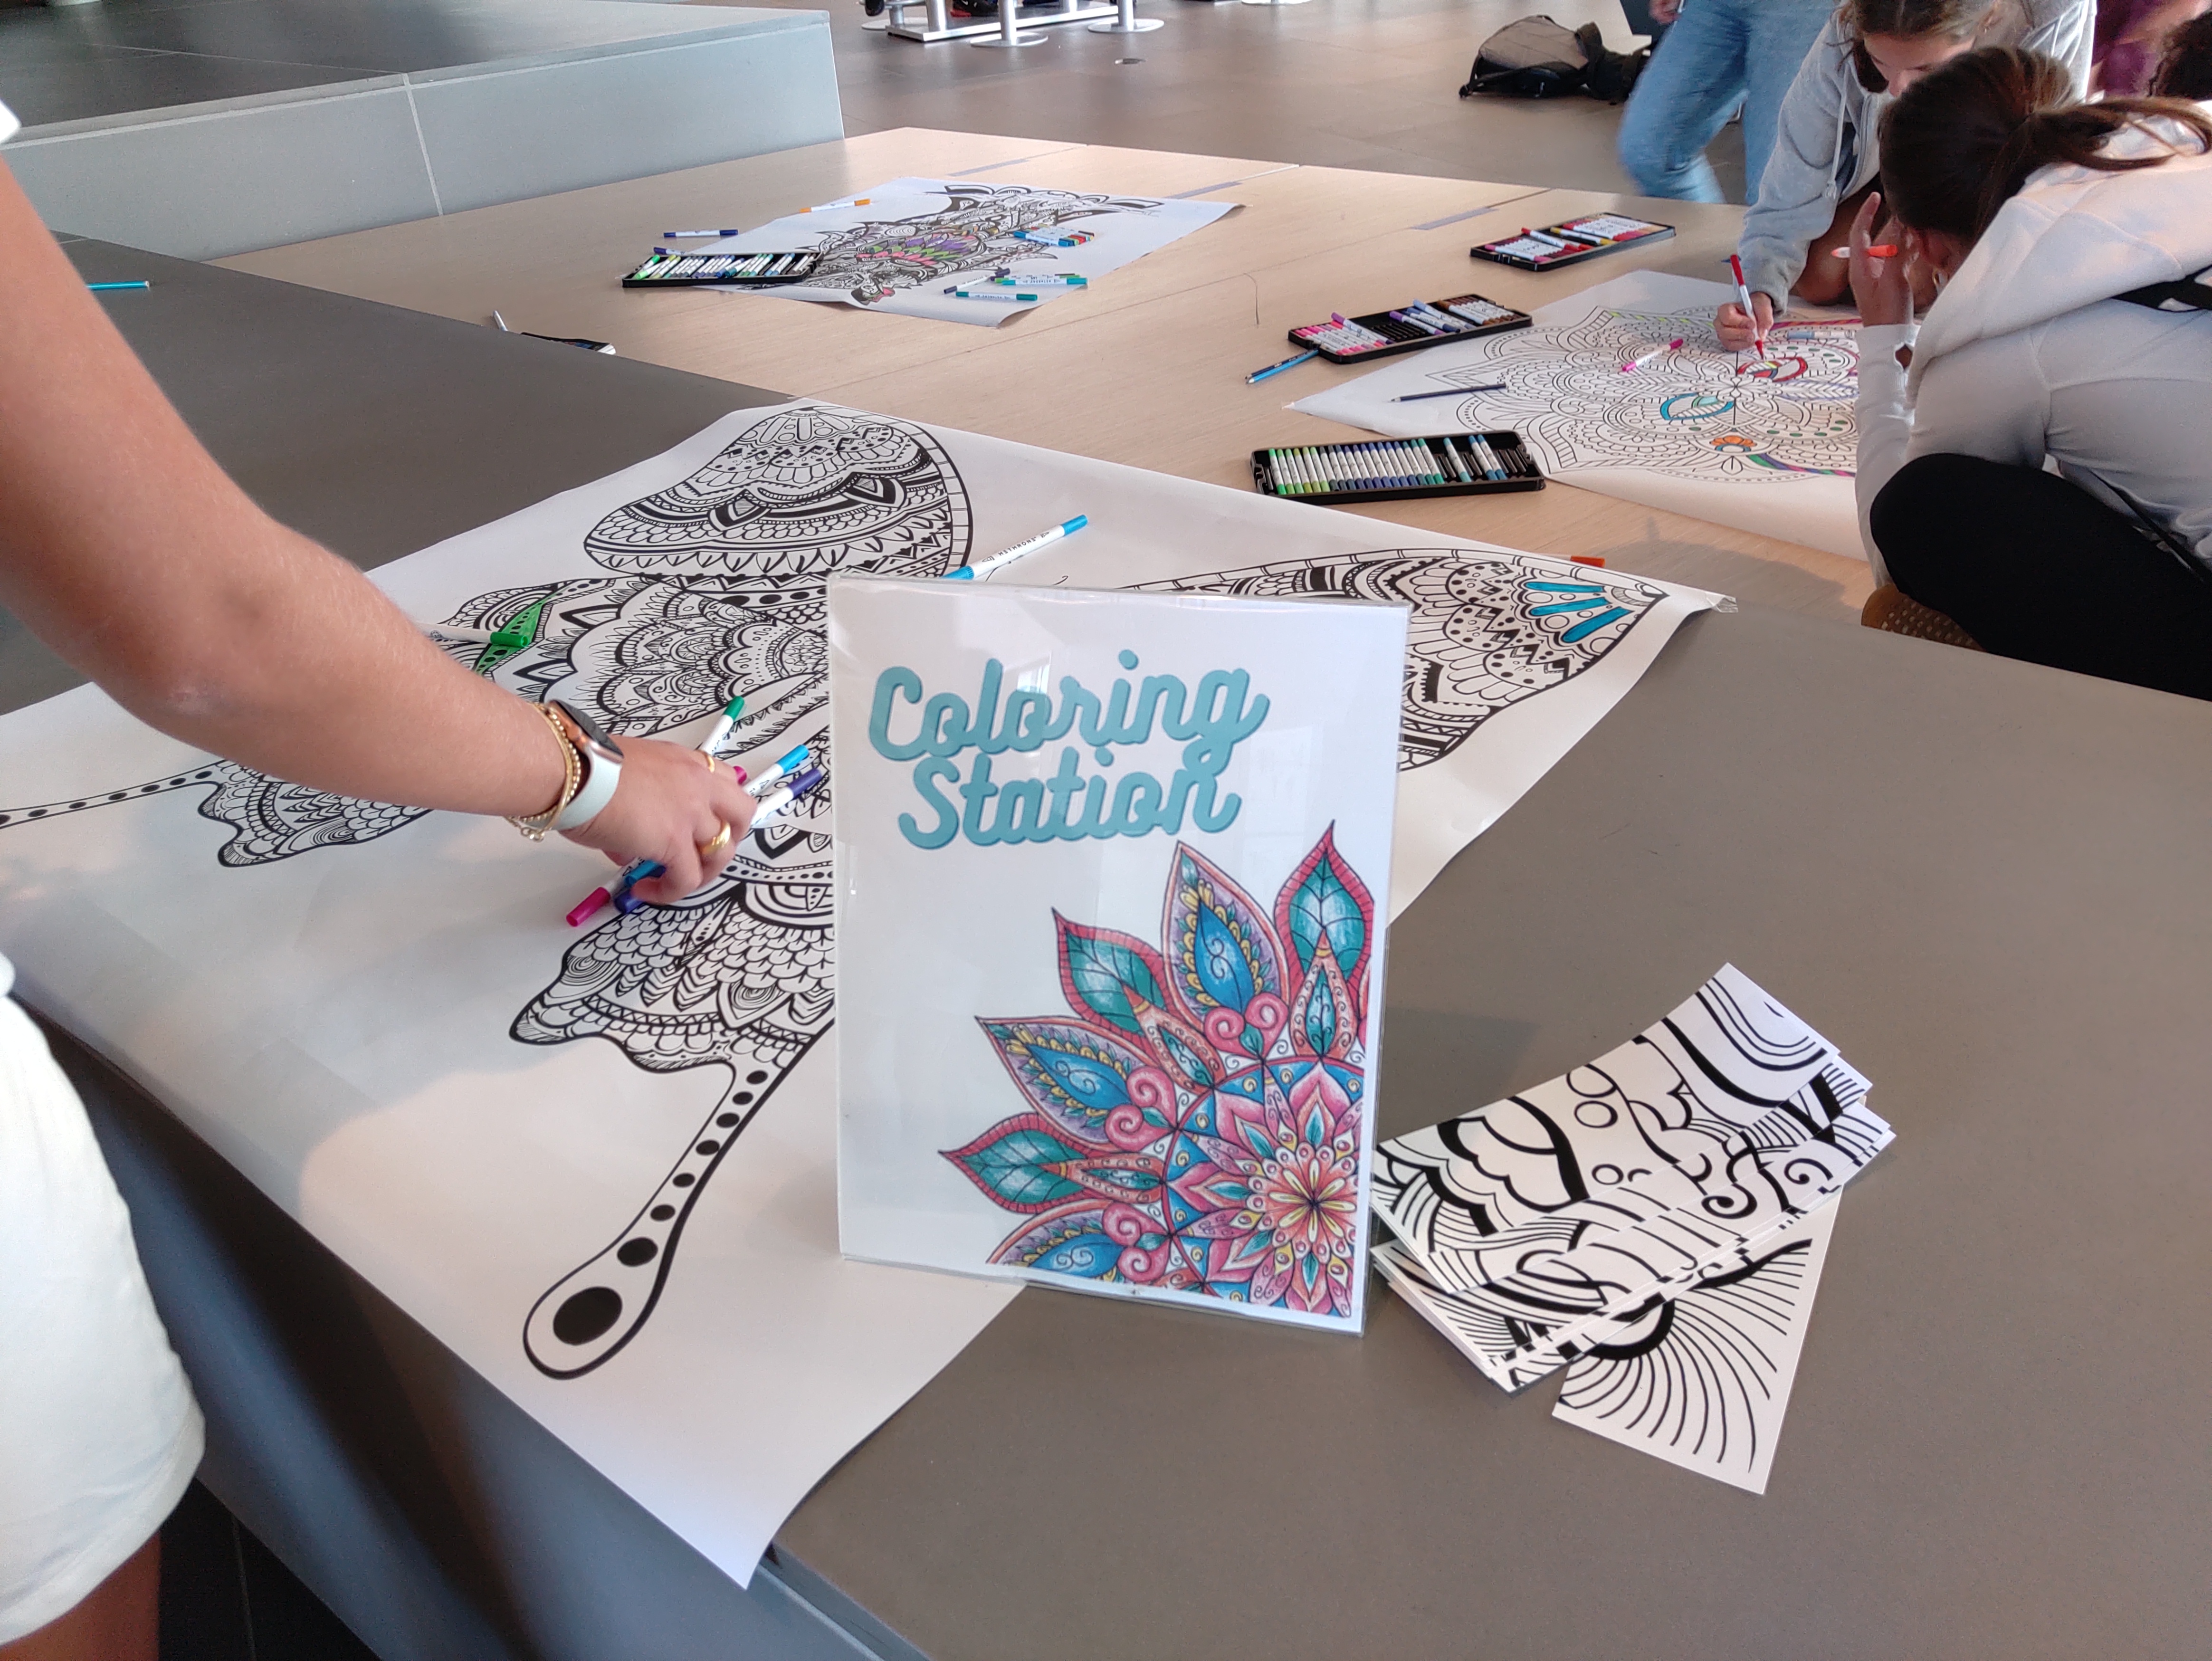 coloring station at an event